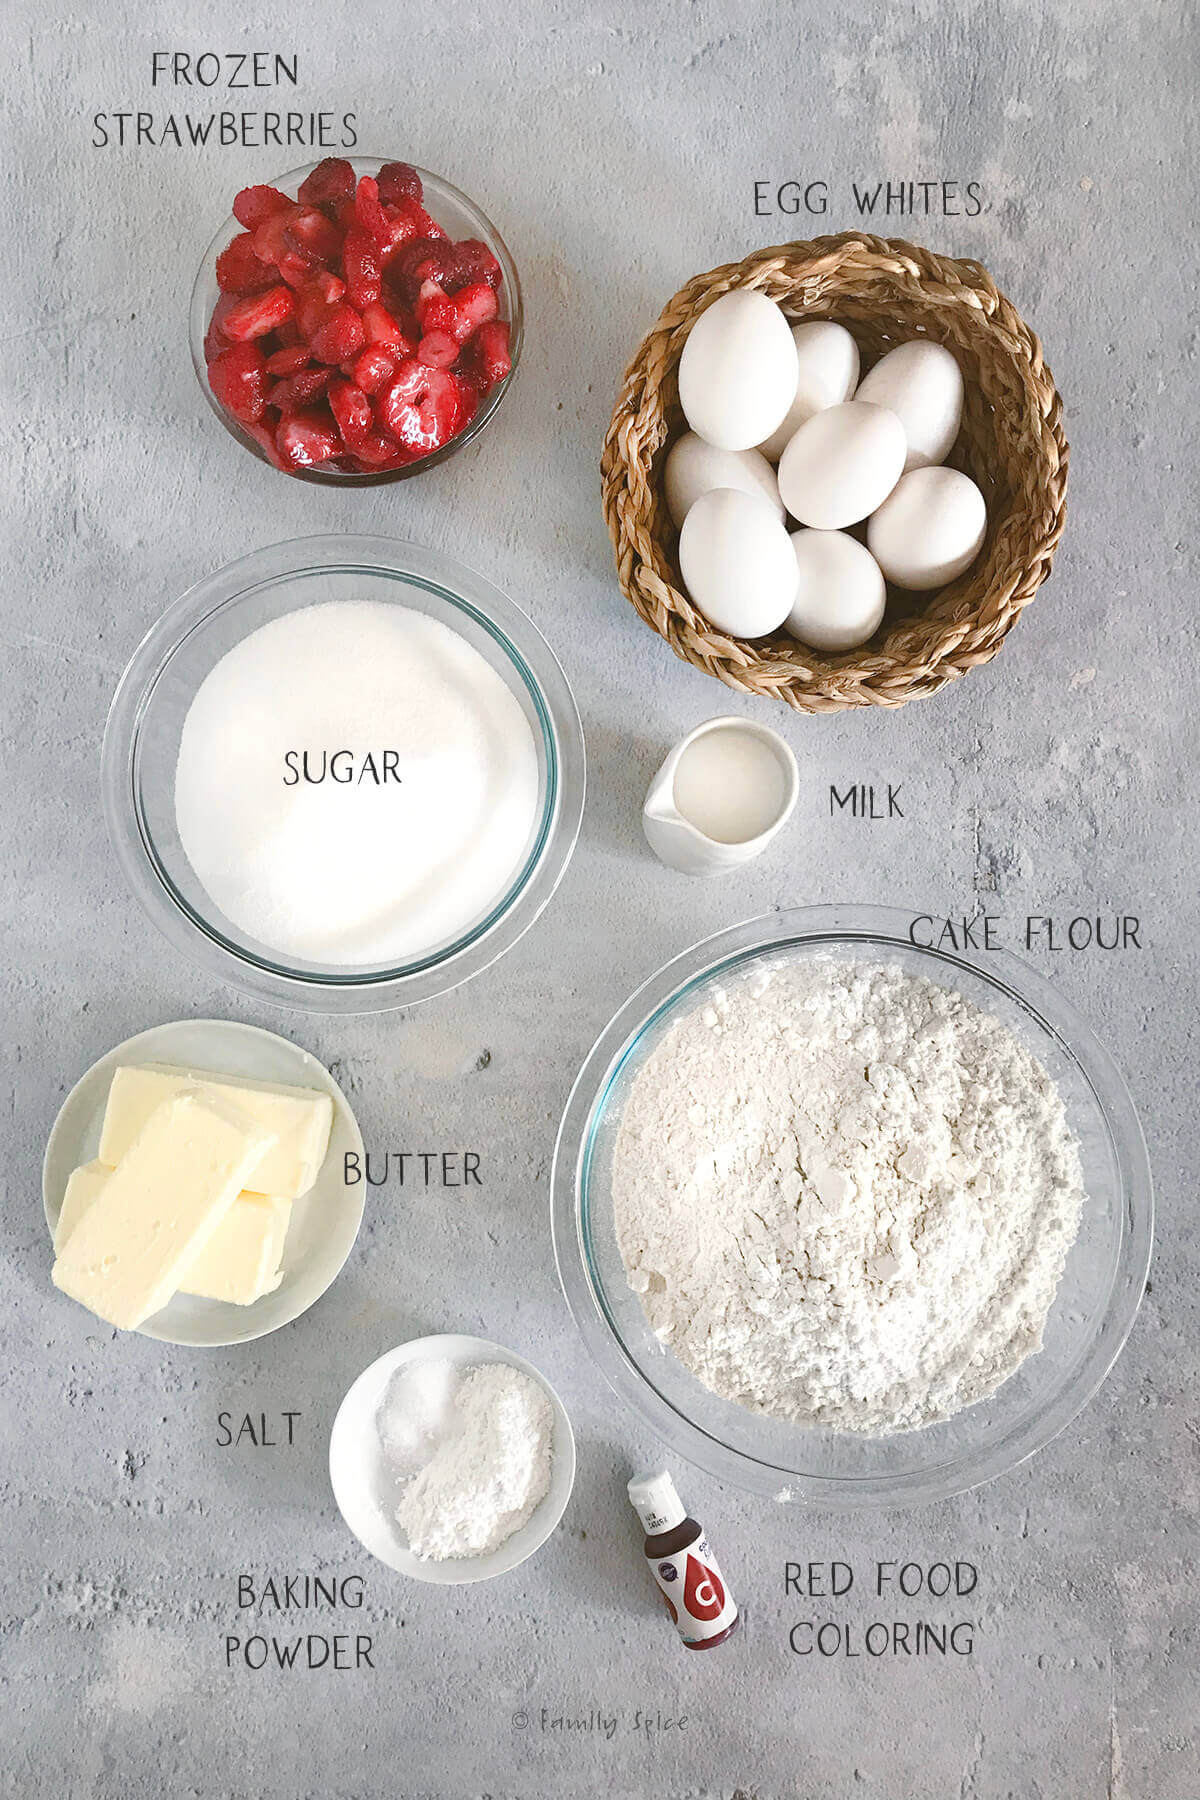 Labeled ingredients to make strawberry cake